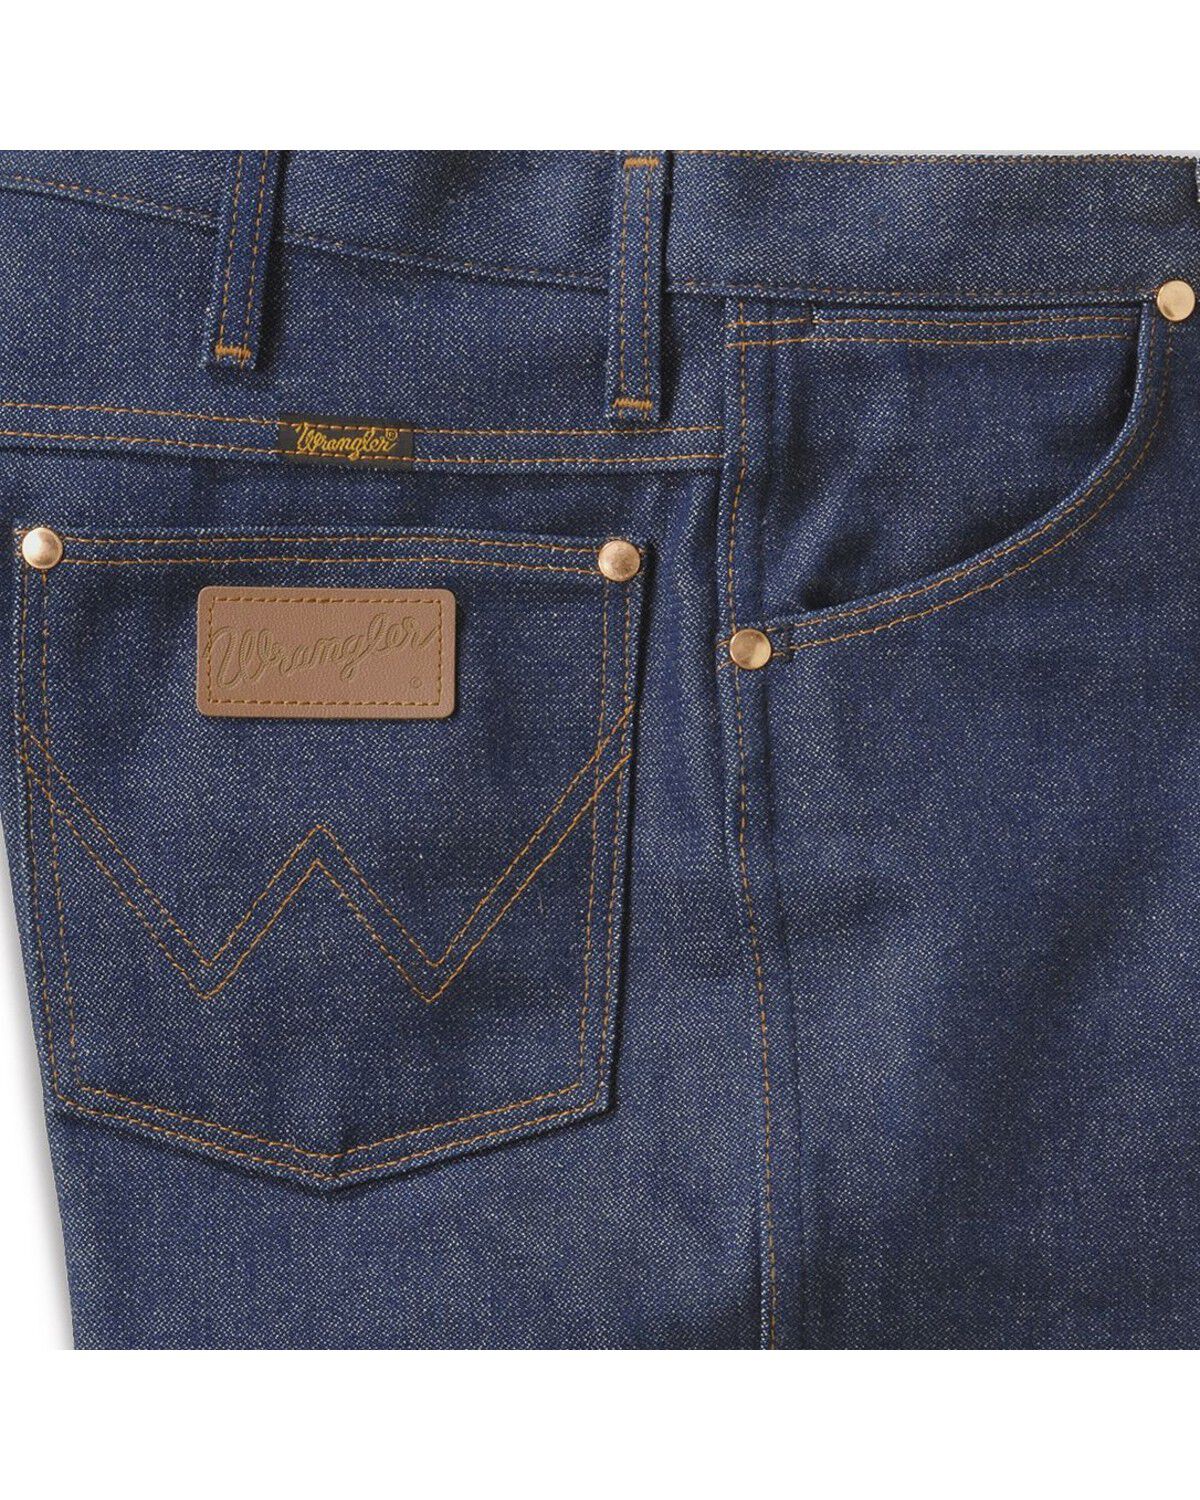 best place to buy wrangler jeans